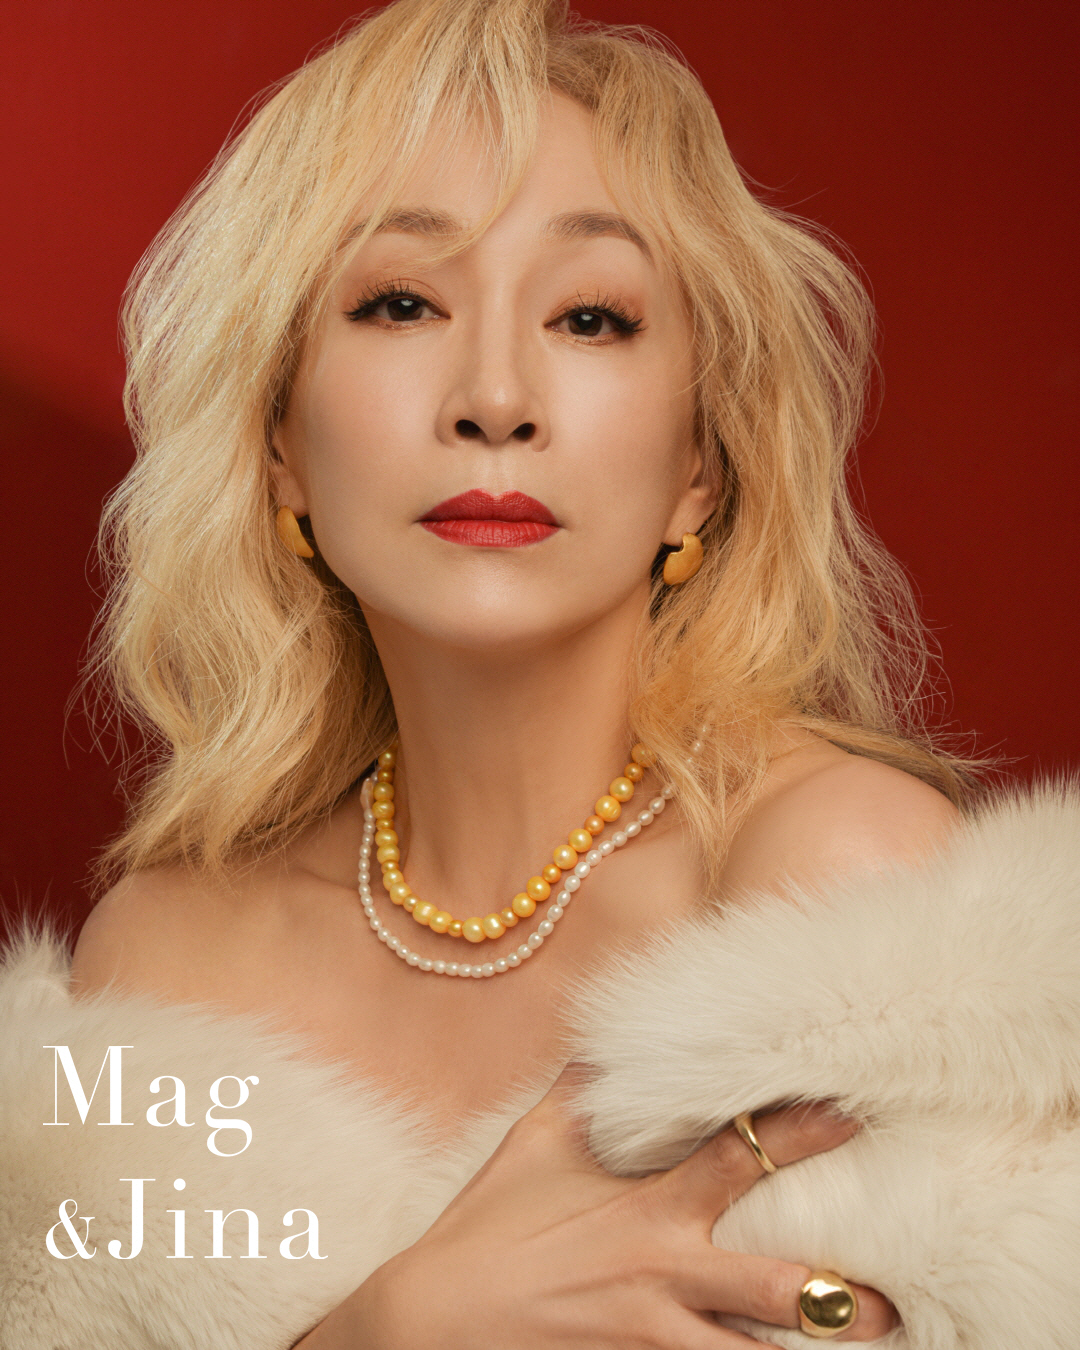 Actor Park Hae-mi showed off the unique visual of Koreas best musical diva down.Park Hae-mi in the fashion magazine McAngina Interview picture released on the 12th showed elegant appearance with white and gold color dress.Especially red lip makeup and alluring eyes, veteran actor intense force was emitted.Park Hae-mi, who is currently facing the audience with authentic play through Play Agnes of God, said, I liked the fact that three women were the main characters.Its a difficult work, but every time the three actors practice, they are taking each others ambassadors and creating synergies.Park Hae-mi also released a dizzying episode: At the time of the musical Nonsense Jamboree appearance, I had never memorized the ambassador until just before I got on stage.I also took the stage without posting Dress Zip, he said.Also, last month, he appeared on the talk show Bob is eating - Kang Ho-dongs Bob with his son and musical actor Hwang Seung-jae. I appeared on the talk show to shake off the hardness.I thought that when Sungjae sang, I held each others hands and endured the hard process.In this McAngina, a picture of Hwang Seung-jae was also released along with a picture of Park Hae-mi.Hwang Seung-jae, wearing a suit, produced a splashing atmosphere with various facial expressions, and also showed a cute young man wearing a pajama.My mother is like a lover who speaks with me two or three times a day, Hwang Seung-jae said in an interview. Both are passionate and positive because they have strong energy.I also said, Even after arguing with each other, I approach my mother and reconcile with the way of saying, What should I eat? he added.Corona - 19 The next work is suspended, but Hwang Seung-jae is steadily developing himself as an actor.She is performing dance to the choreographer she met through the musical Sowat, which starred in the lead role, as she is preparing for web dramas, EBS entertainment programs, and TV dramas.He said, I want to be a good actor, a passion actor, an audience favorite actor, and an official favorite actor.Meanwhile, McAngina is the first fashion magazine centered on Celability Influencer issued by SBW Group.The representative K-underwear brand Tri is modeled on Actor Kim Soo-hyun for the MZ generation (Millennium + Z generation, born 1980 ~ 2004), and is accompanied by Mac Angie with colorful and diverse contents.In this Mac Angie Park Ye-eun, you can also see the high fashion picture of the acoustic fashion model along with the interview picture of Actor Moon Hee Kyung, model banana, and tick talkers.In addition, you can get a glimpse of the sexy pictures and interviews of seven 2020 Mr. International Korea winners as well as the Interview that stimulates the five senses of Vivian girls.McAngina appendix will be presented to the hospital and the esthetic cosmetics Erti Sun Cream.McAngina Park Ye-eun can be purchased at Yes24, Aladdin Bookstore, Kyobo Bookstore Online Bookstore, Seoul, Gyeonggi Kyobo Bookstore and Youngpoong Bookstore offline stores.